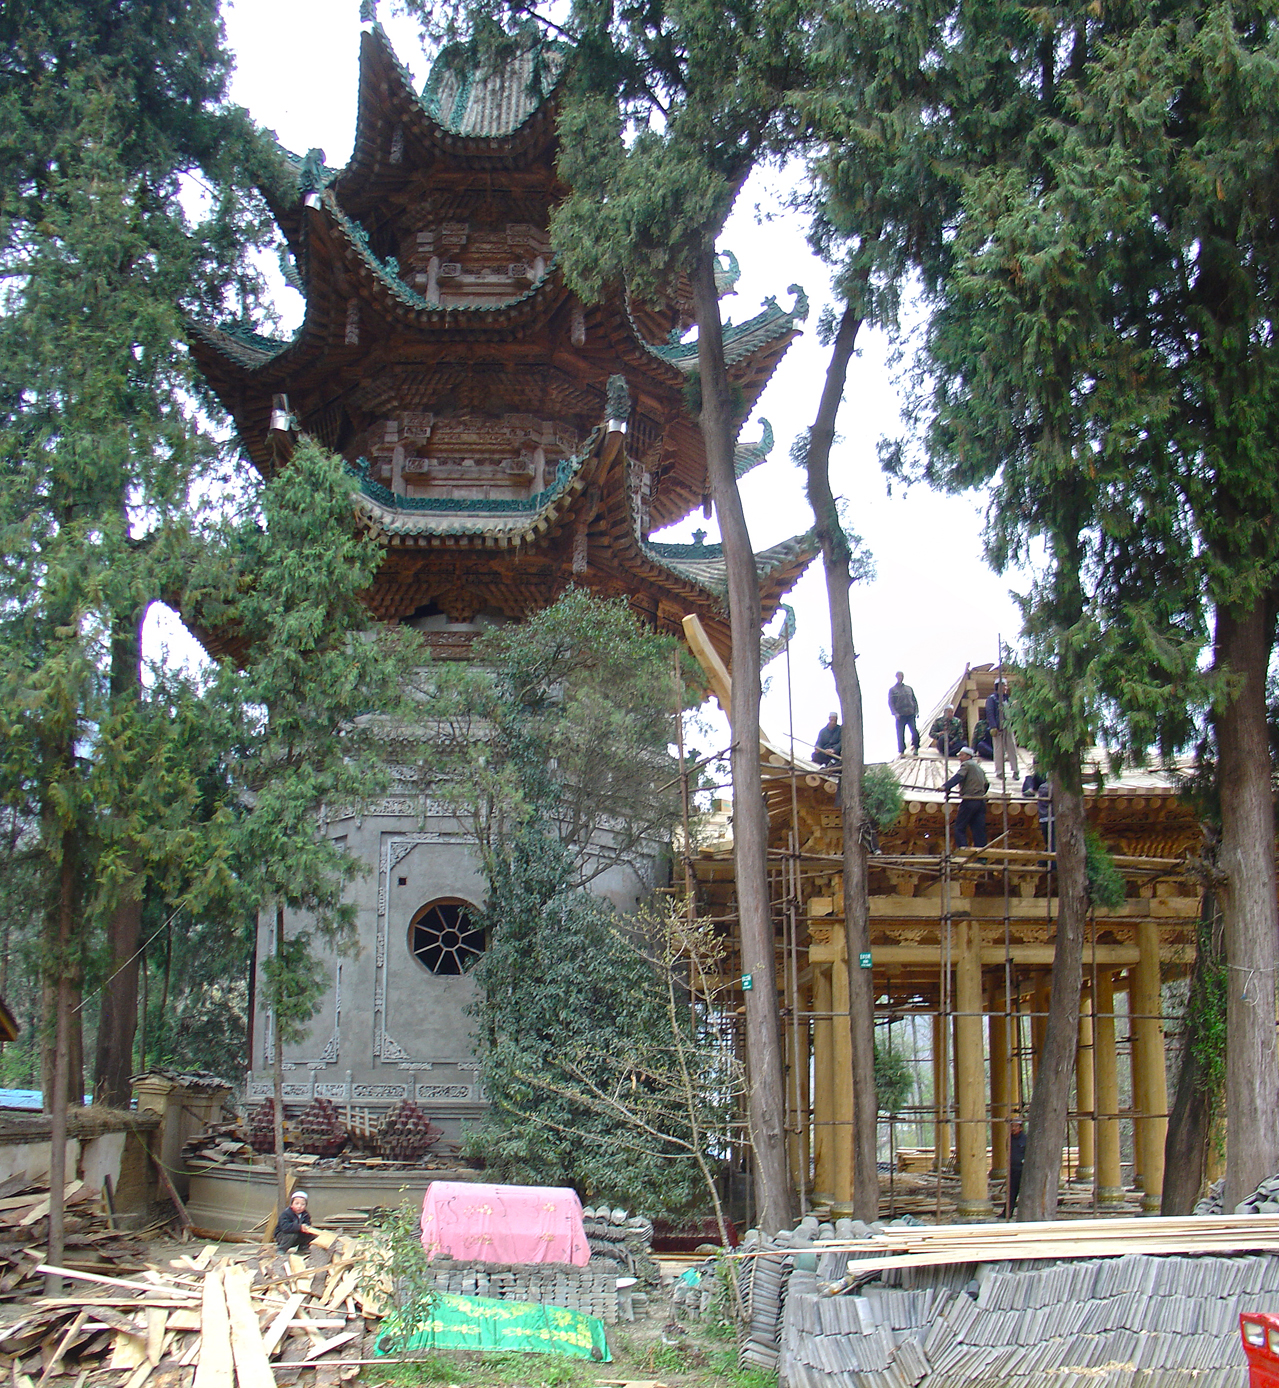 A local temple built by Hui People - Curiously, in the middle of nowhere, a small community of Hui Chinese (回族) have built their own temple.